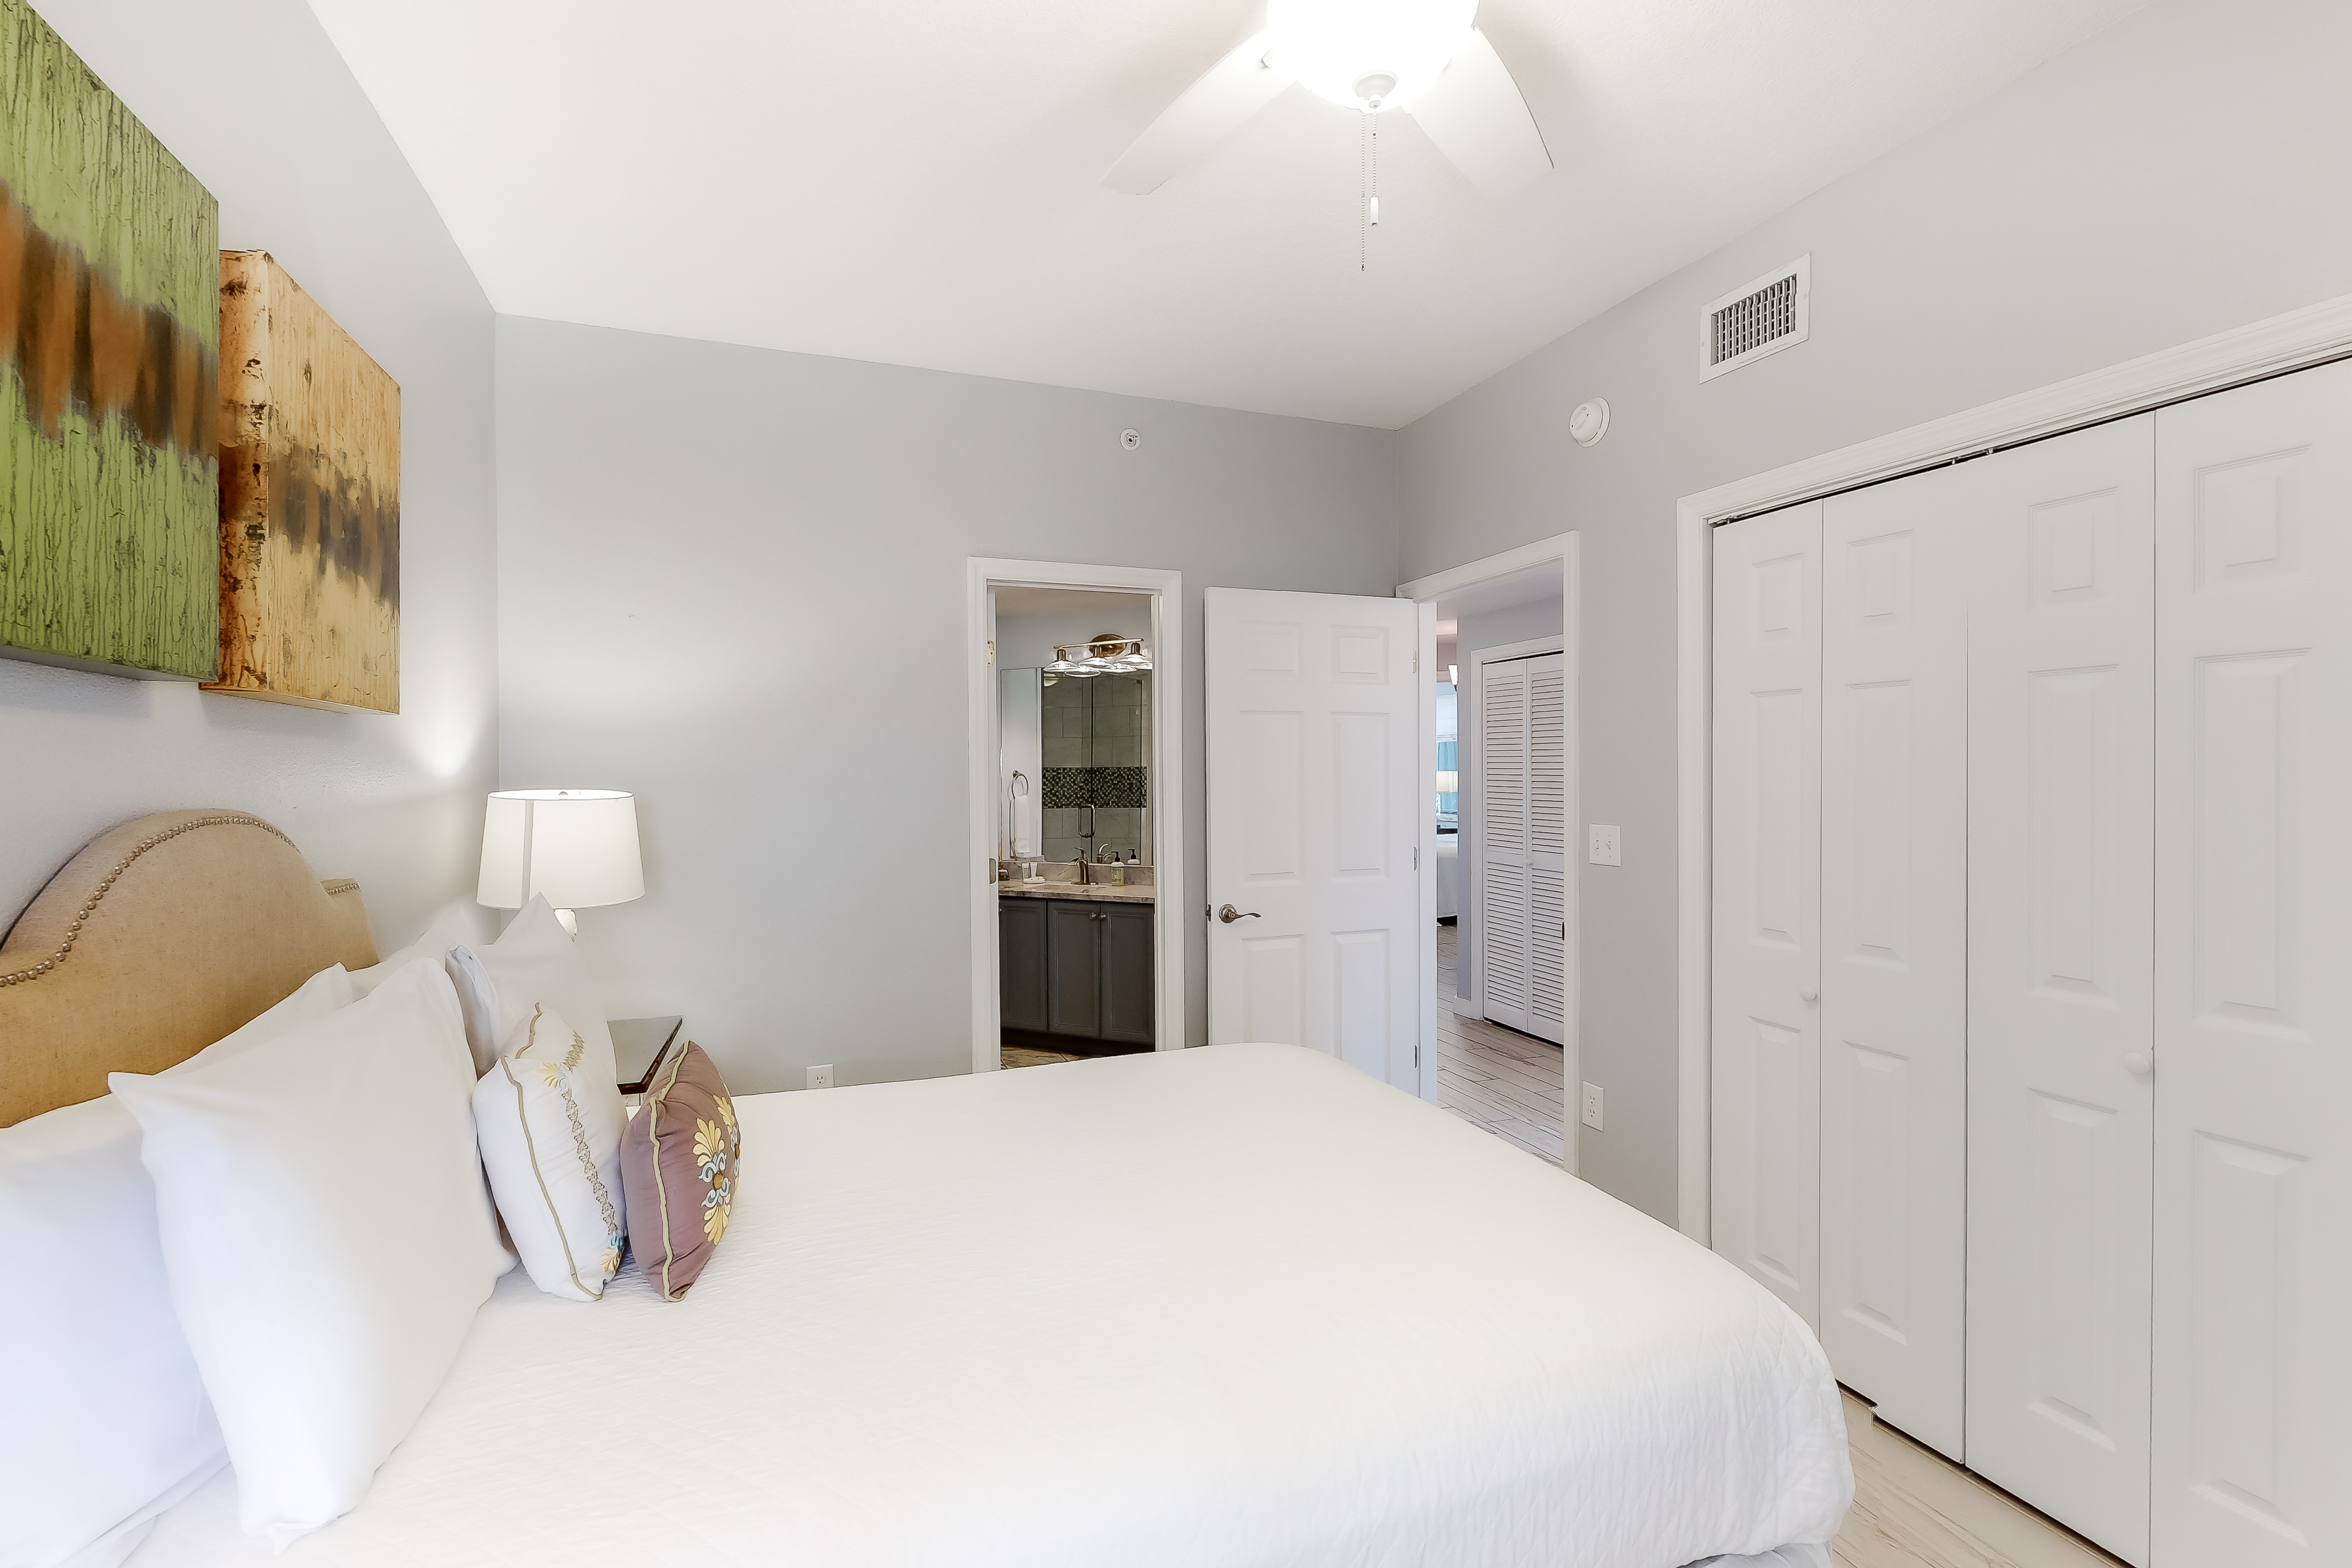 Dunes of Seagrove B202 Condo rental in Dunes of Seagrove in Highway 30-A Florida - #13